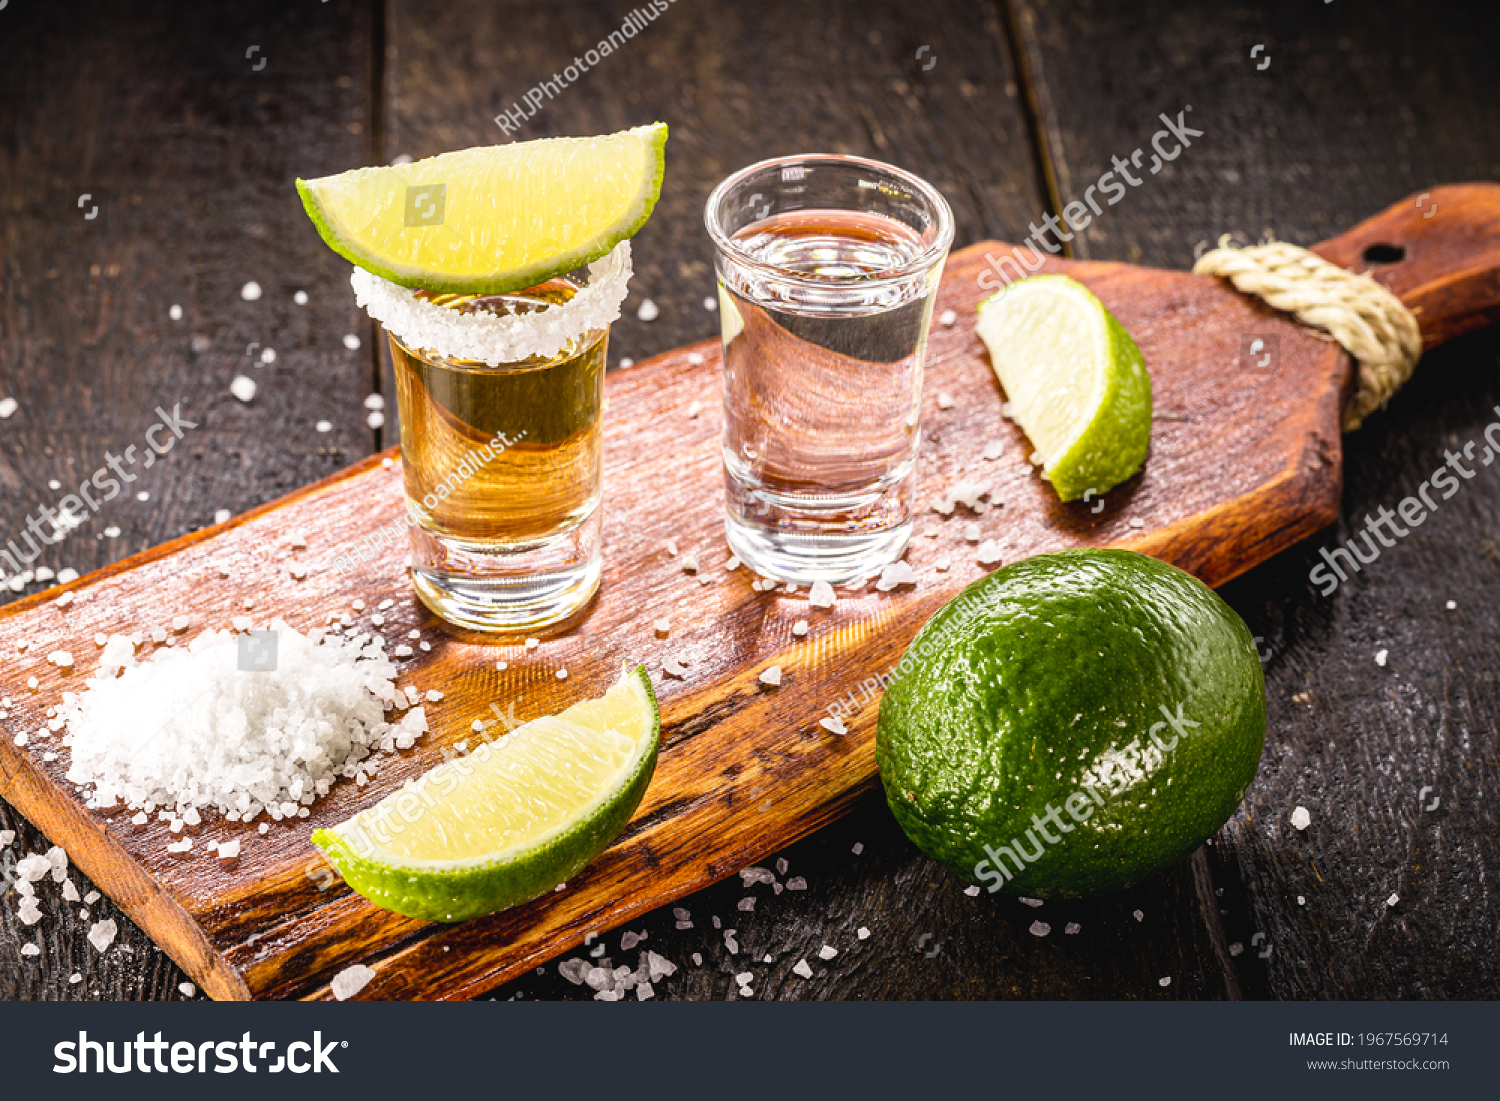 glasses of tequila, gold tequila and silver tequila, typical mexican drink #1967569714